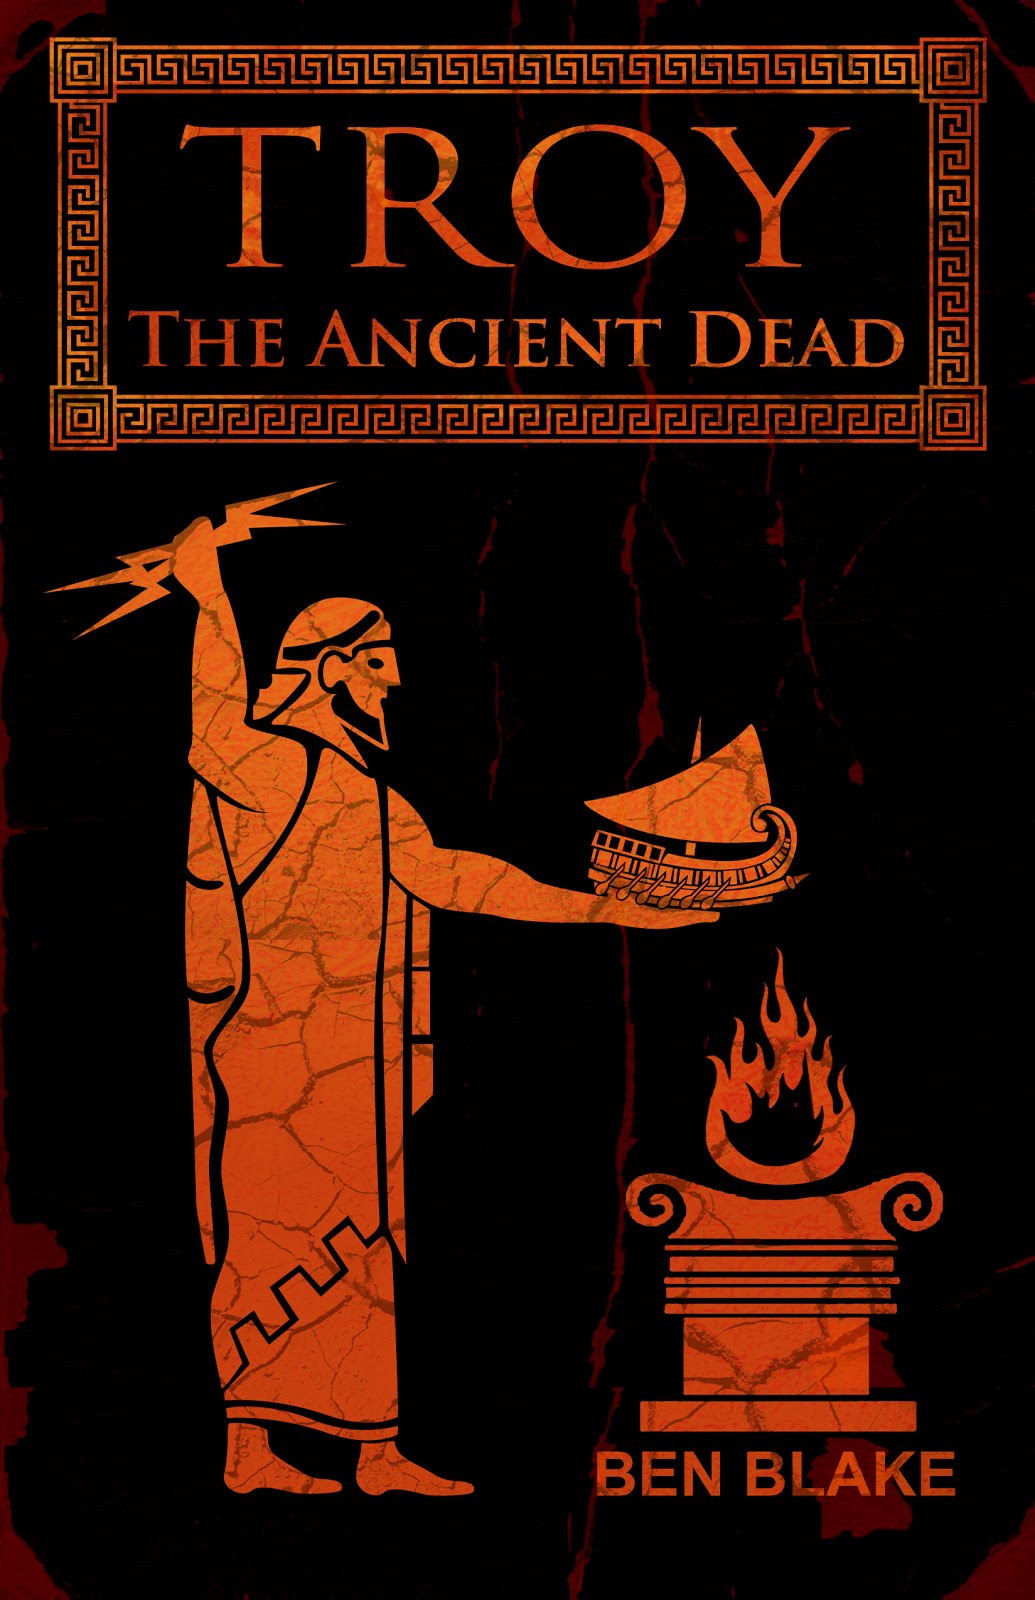 The Ancient Dead